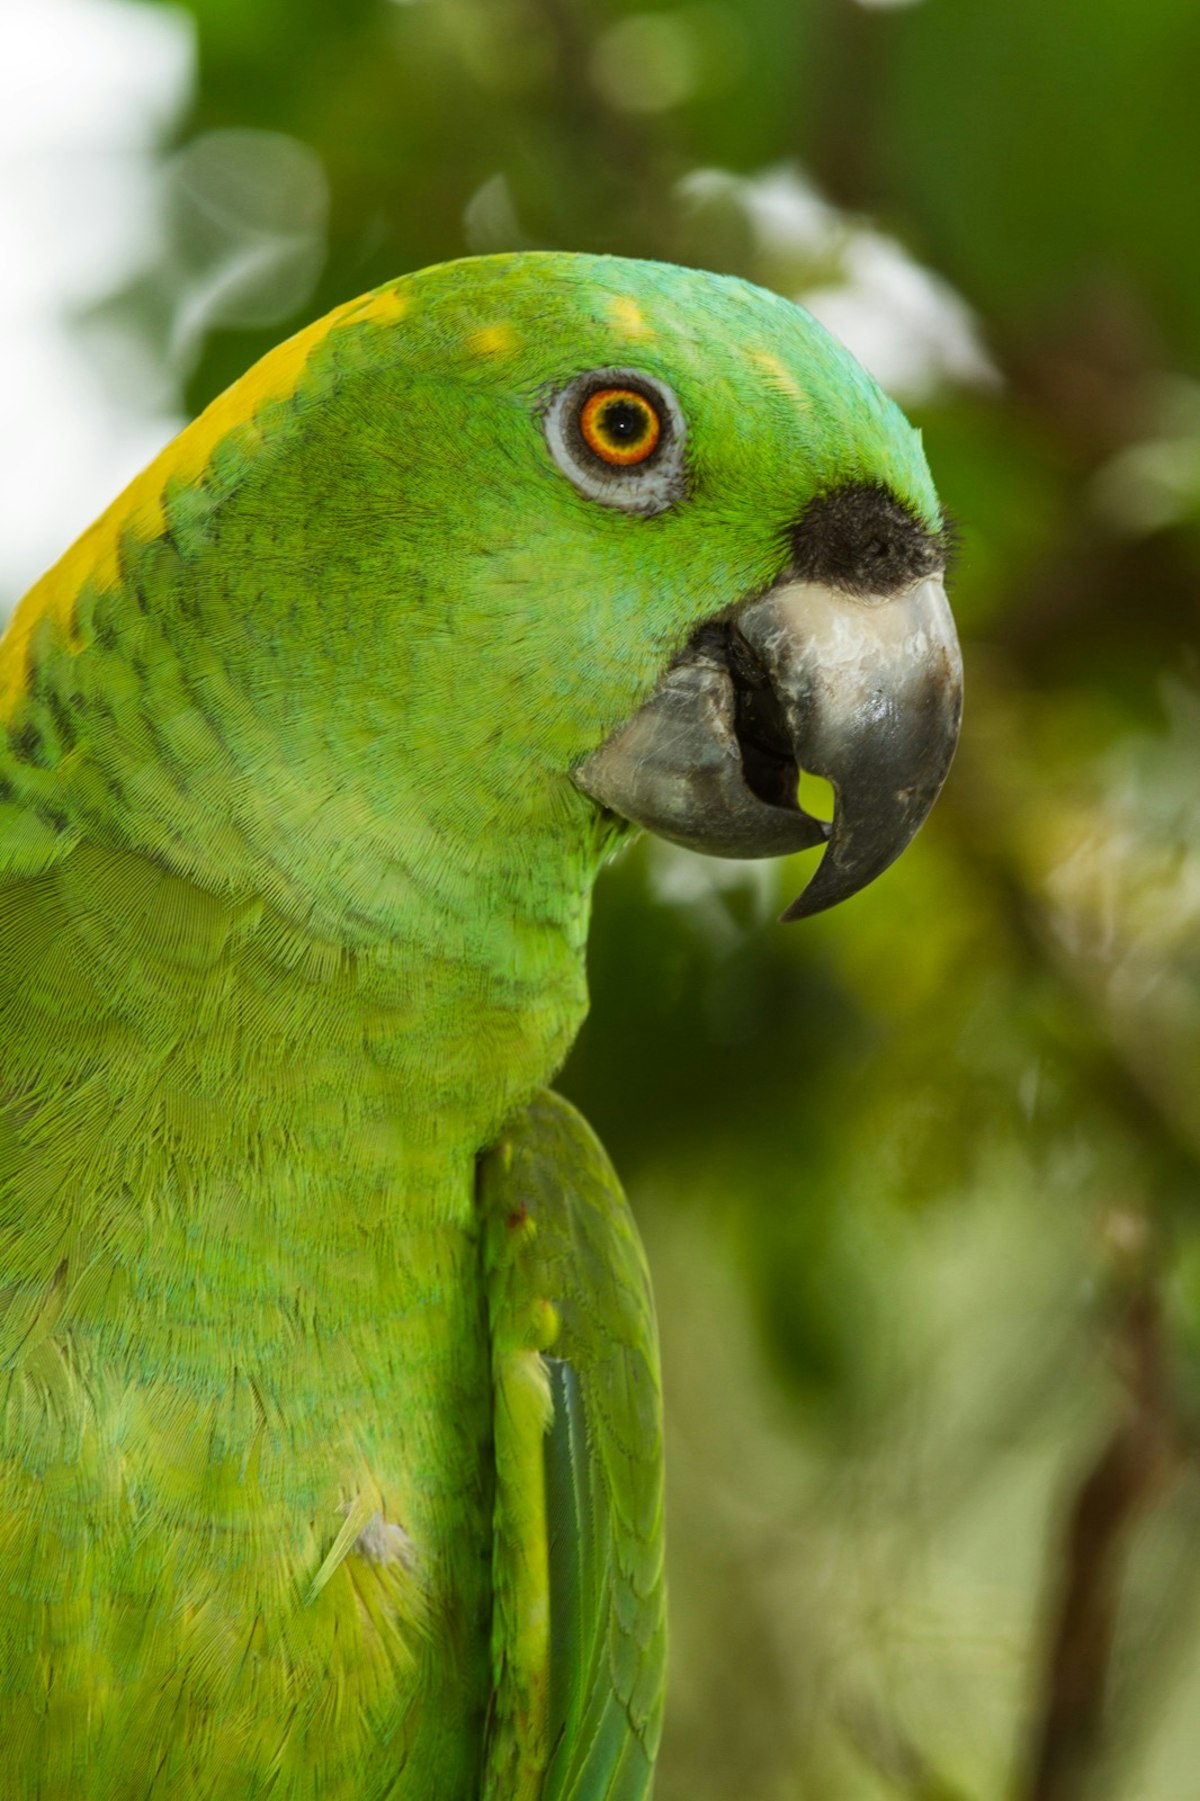 The Yellow-naped Amazon or Yellow-naped Parrot, Amazona auropalliata, ranges from southern Mexico to northern Costa Rica. (Photo by: Jon G. Fuller/VW Pics/UIG via Getty Images)